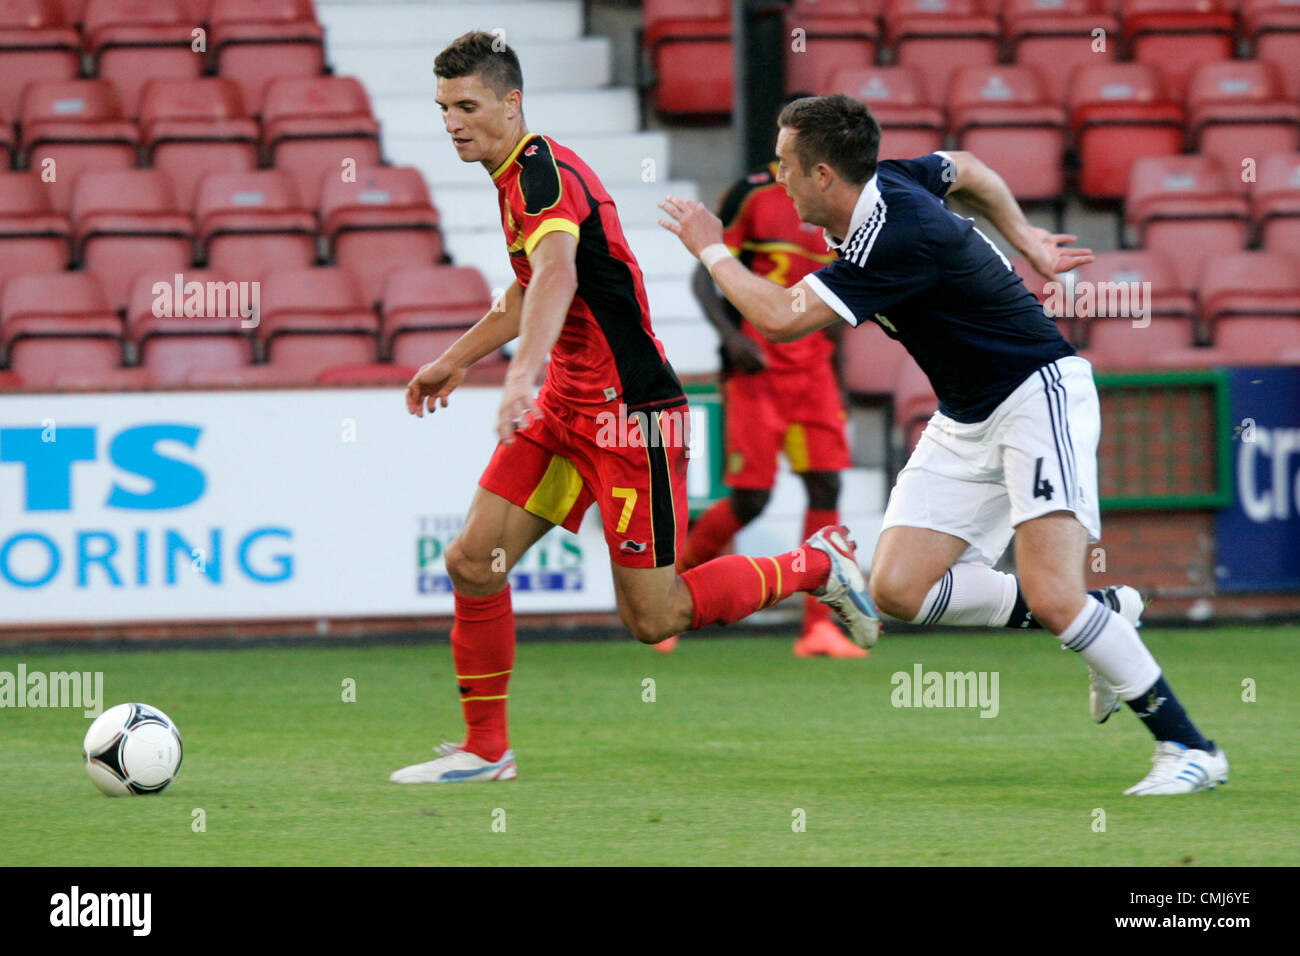 14th Aug 2012. 14.08.2012 Dunfermline, Scotland. 4 Daniel Wallace and 7 Thomas Meunier in action during the Vauxhall Under-21 International Challenge Match betweenScotland and Belgium at East End Park. Stock Photo